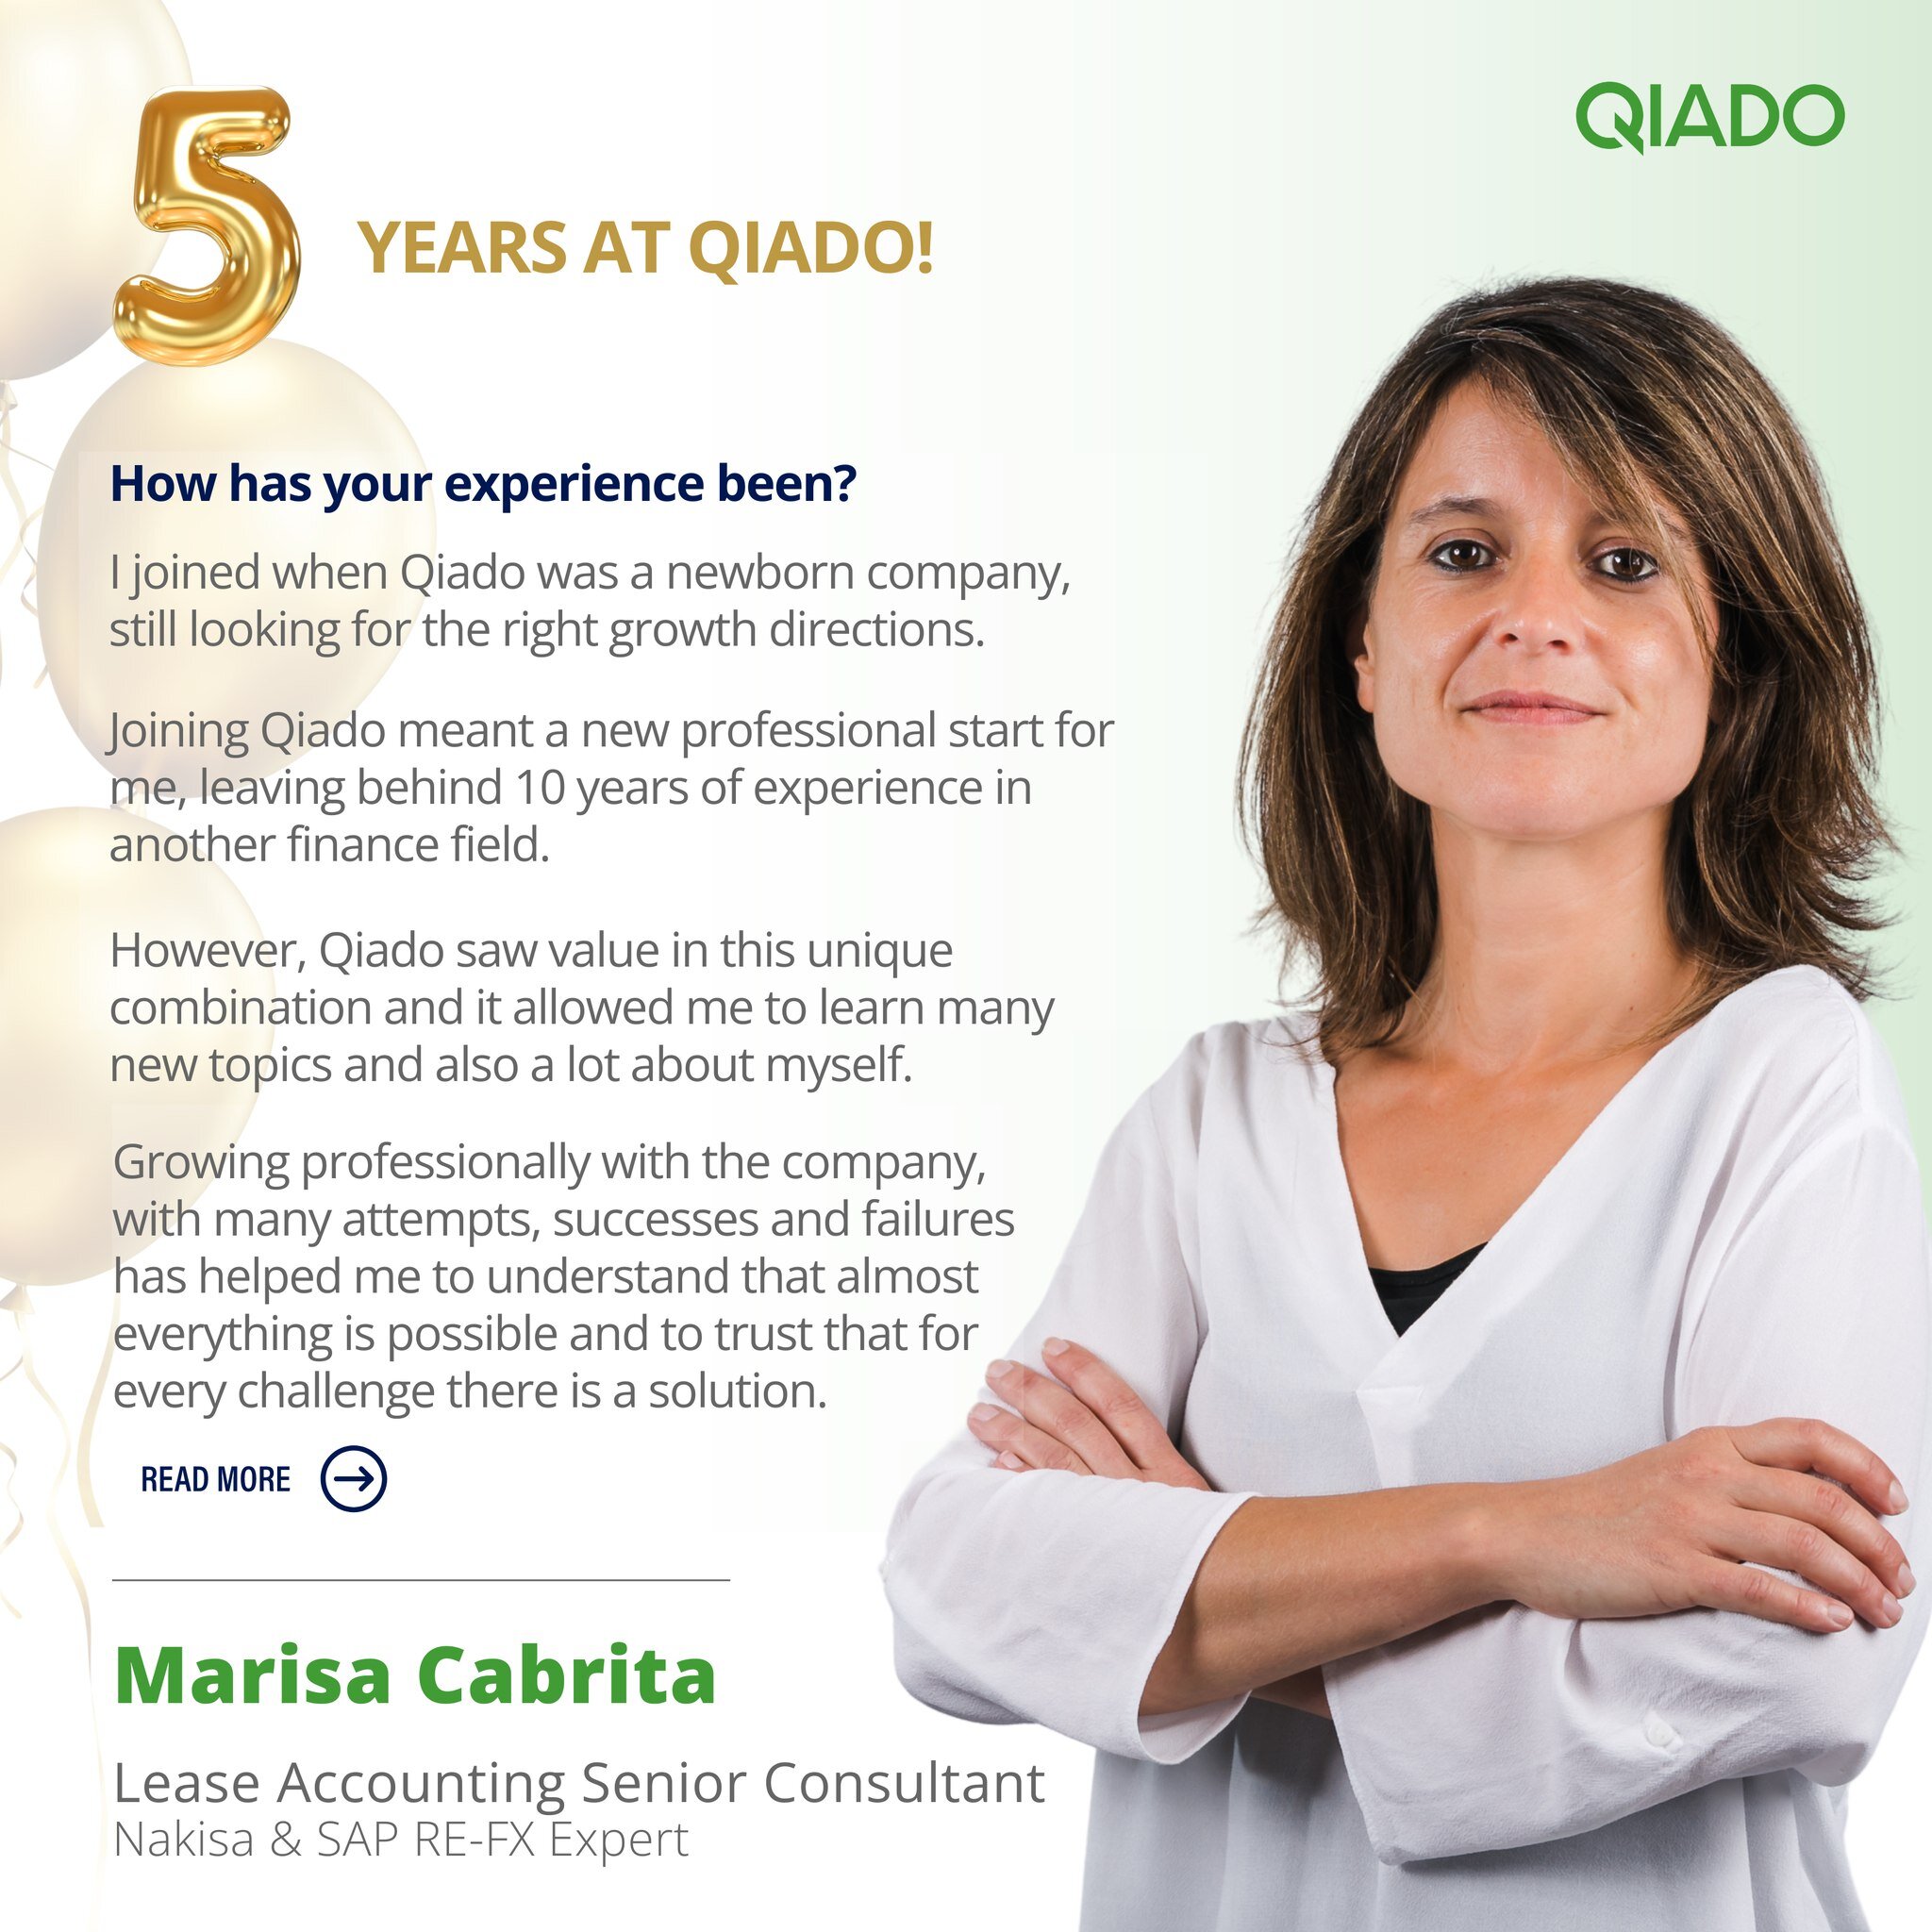 What a great milestone to celebrate🎉 Marisa Cabrita has been part of the team since the very beginning of Qiado. We are absolutely happy to have her by our side in this journey and honored to be part of her personal and professional development. 

C